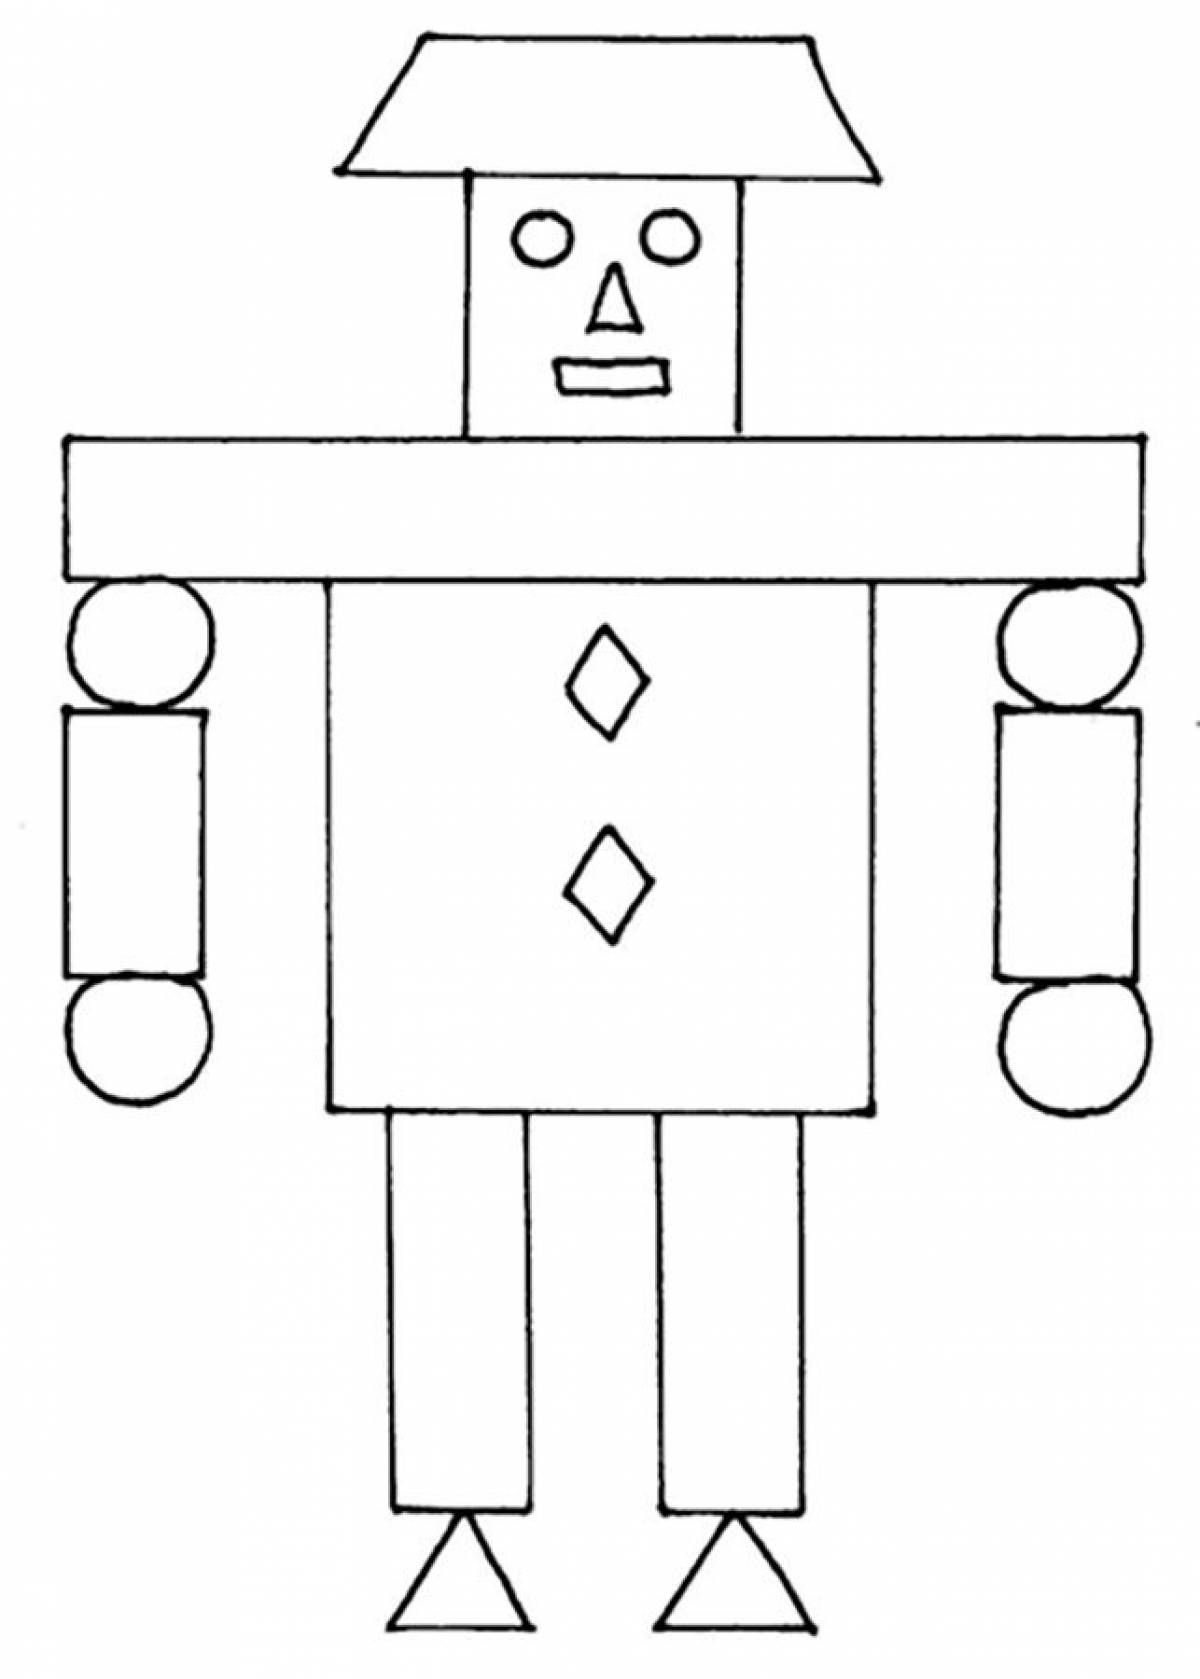 Robot made of geometric shapes